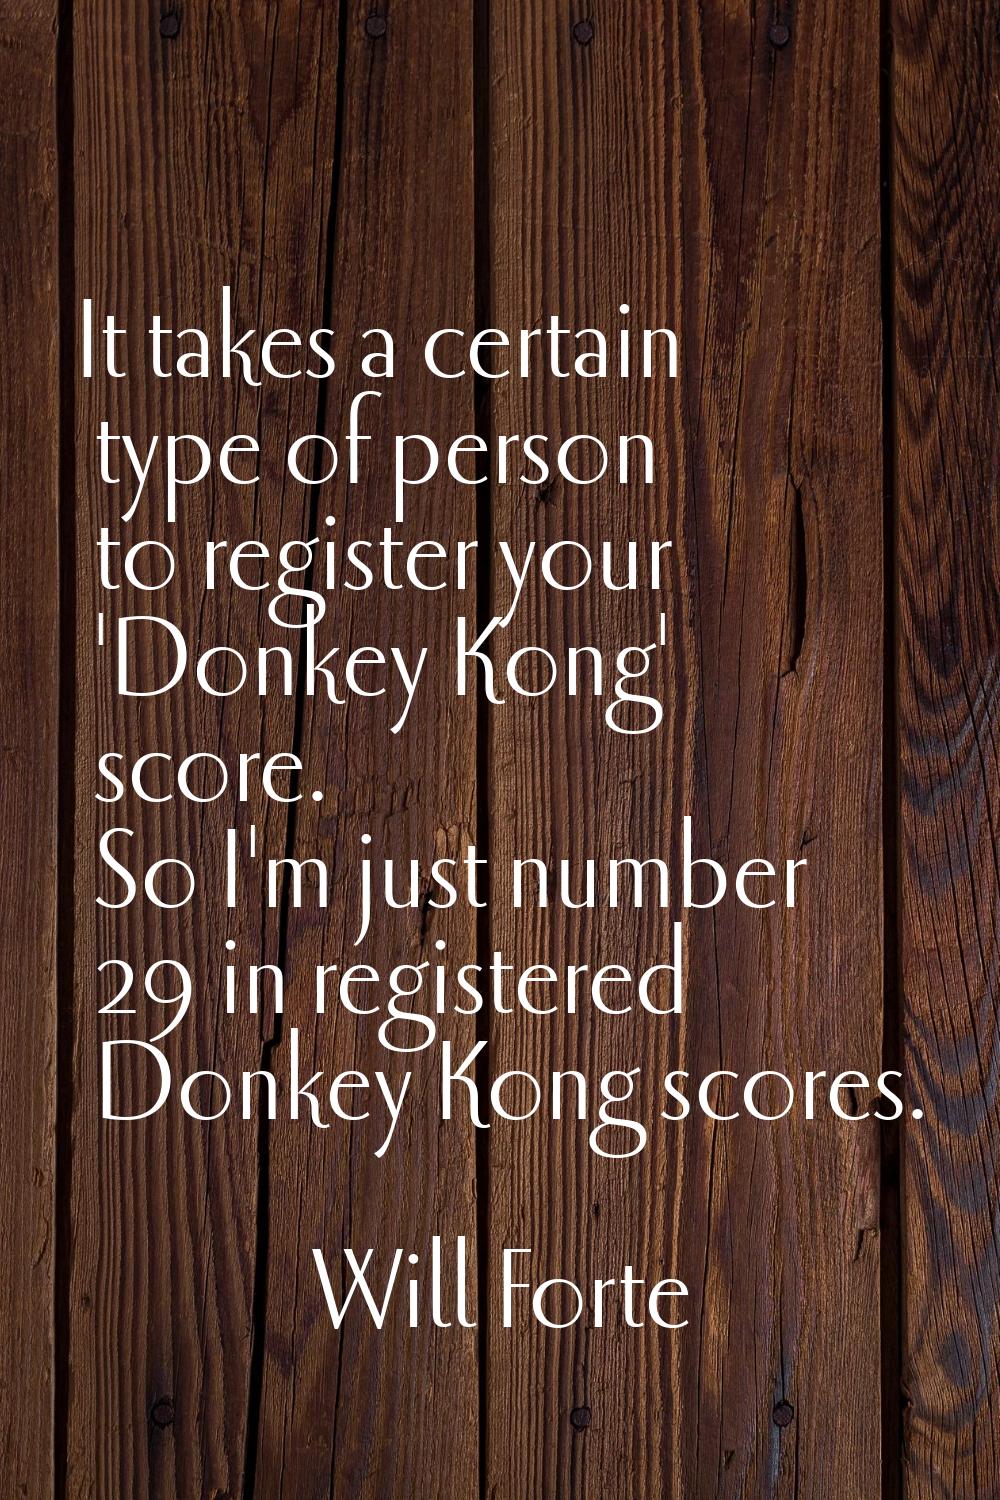 It takes a certain type of person to register your 'Donkey Kong' score. So I'm just number 29 in re